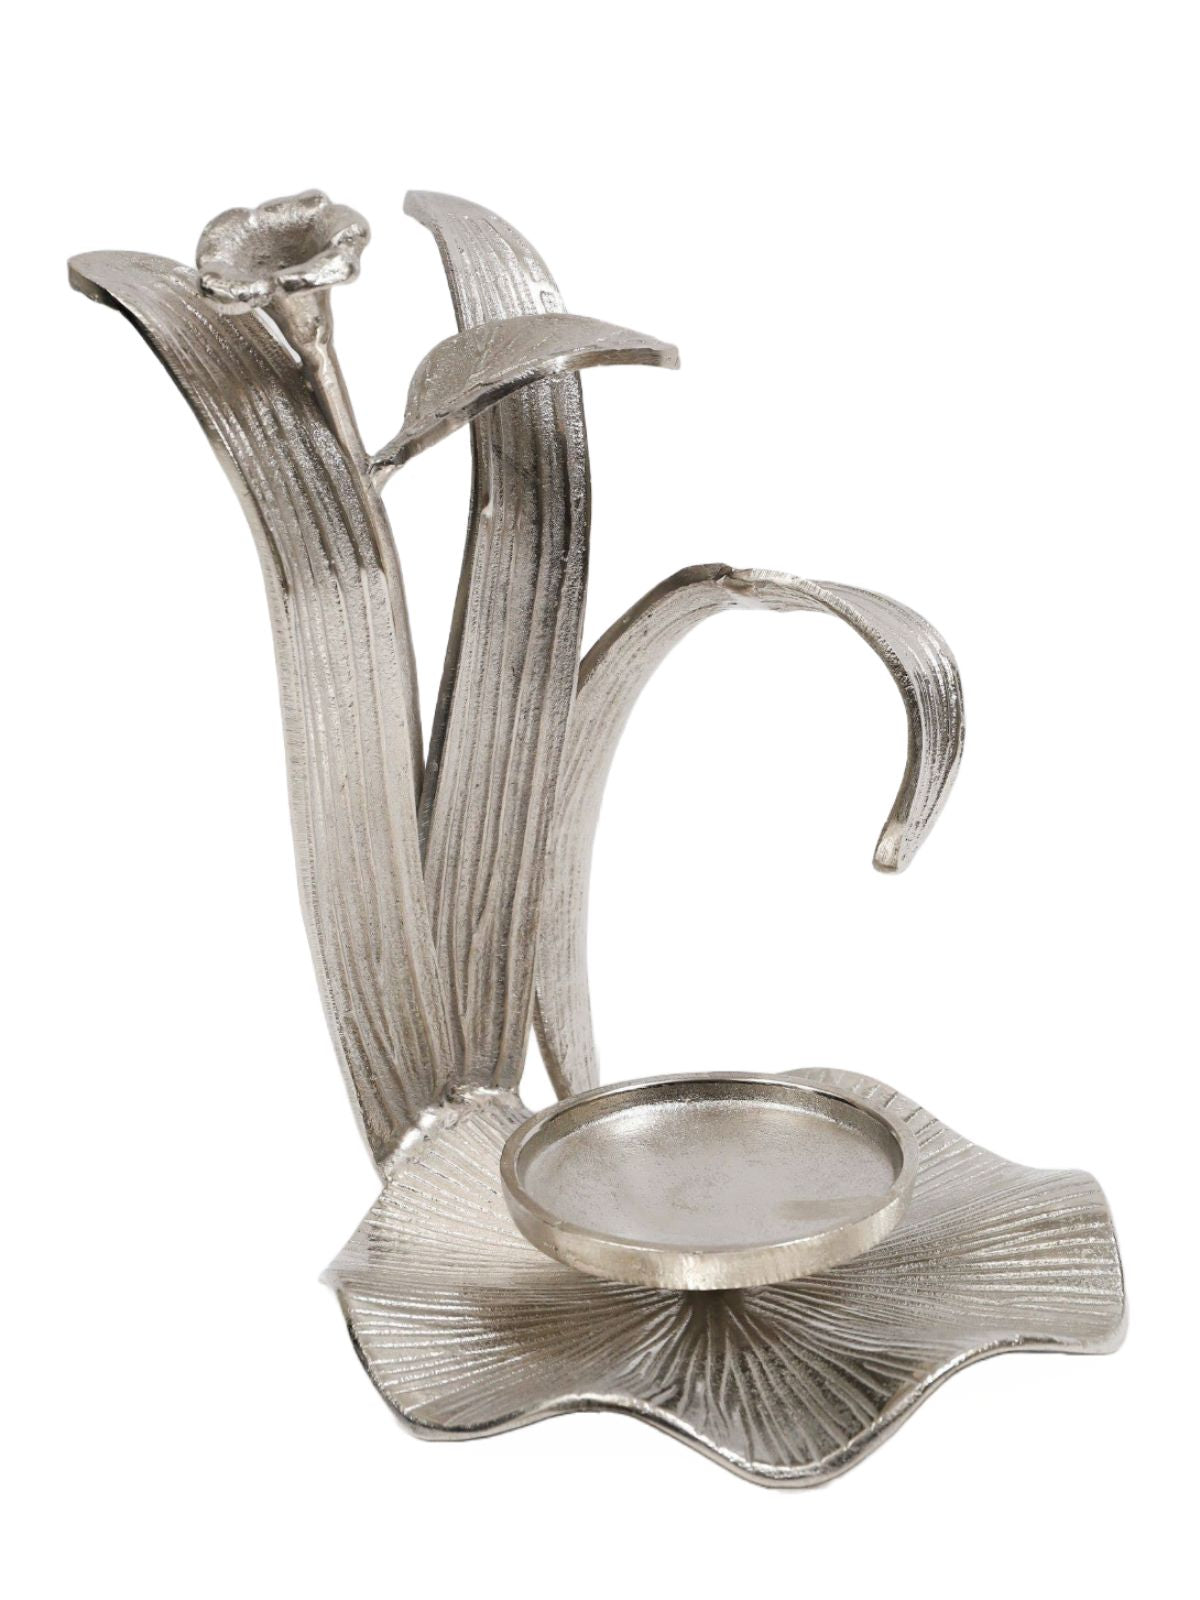 12H Stainless Steel Silver Hurricane Candle Holders with Flower Design. Sold By KYA Home Decor.